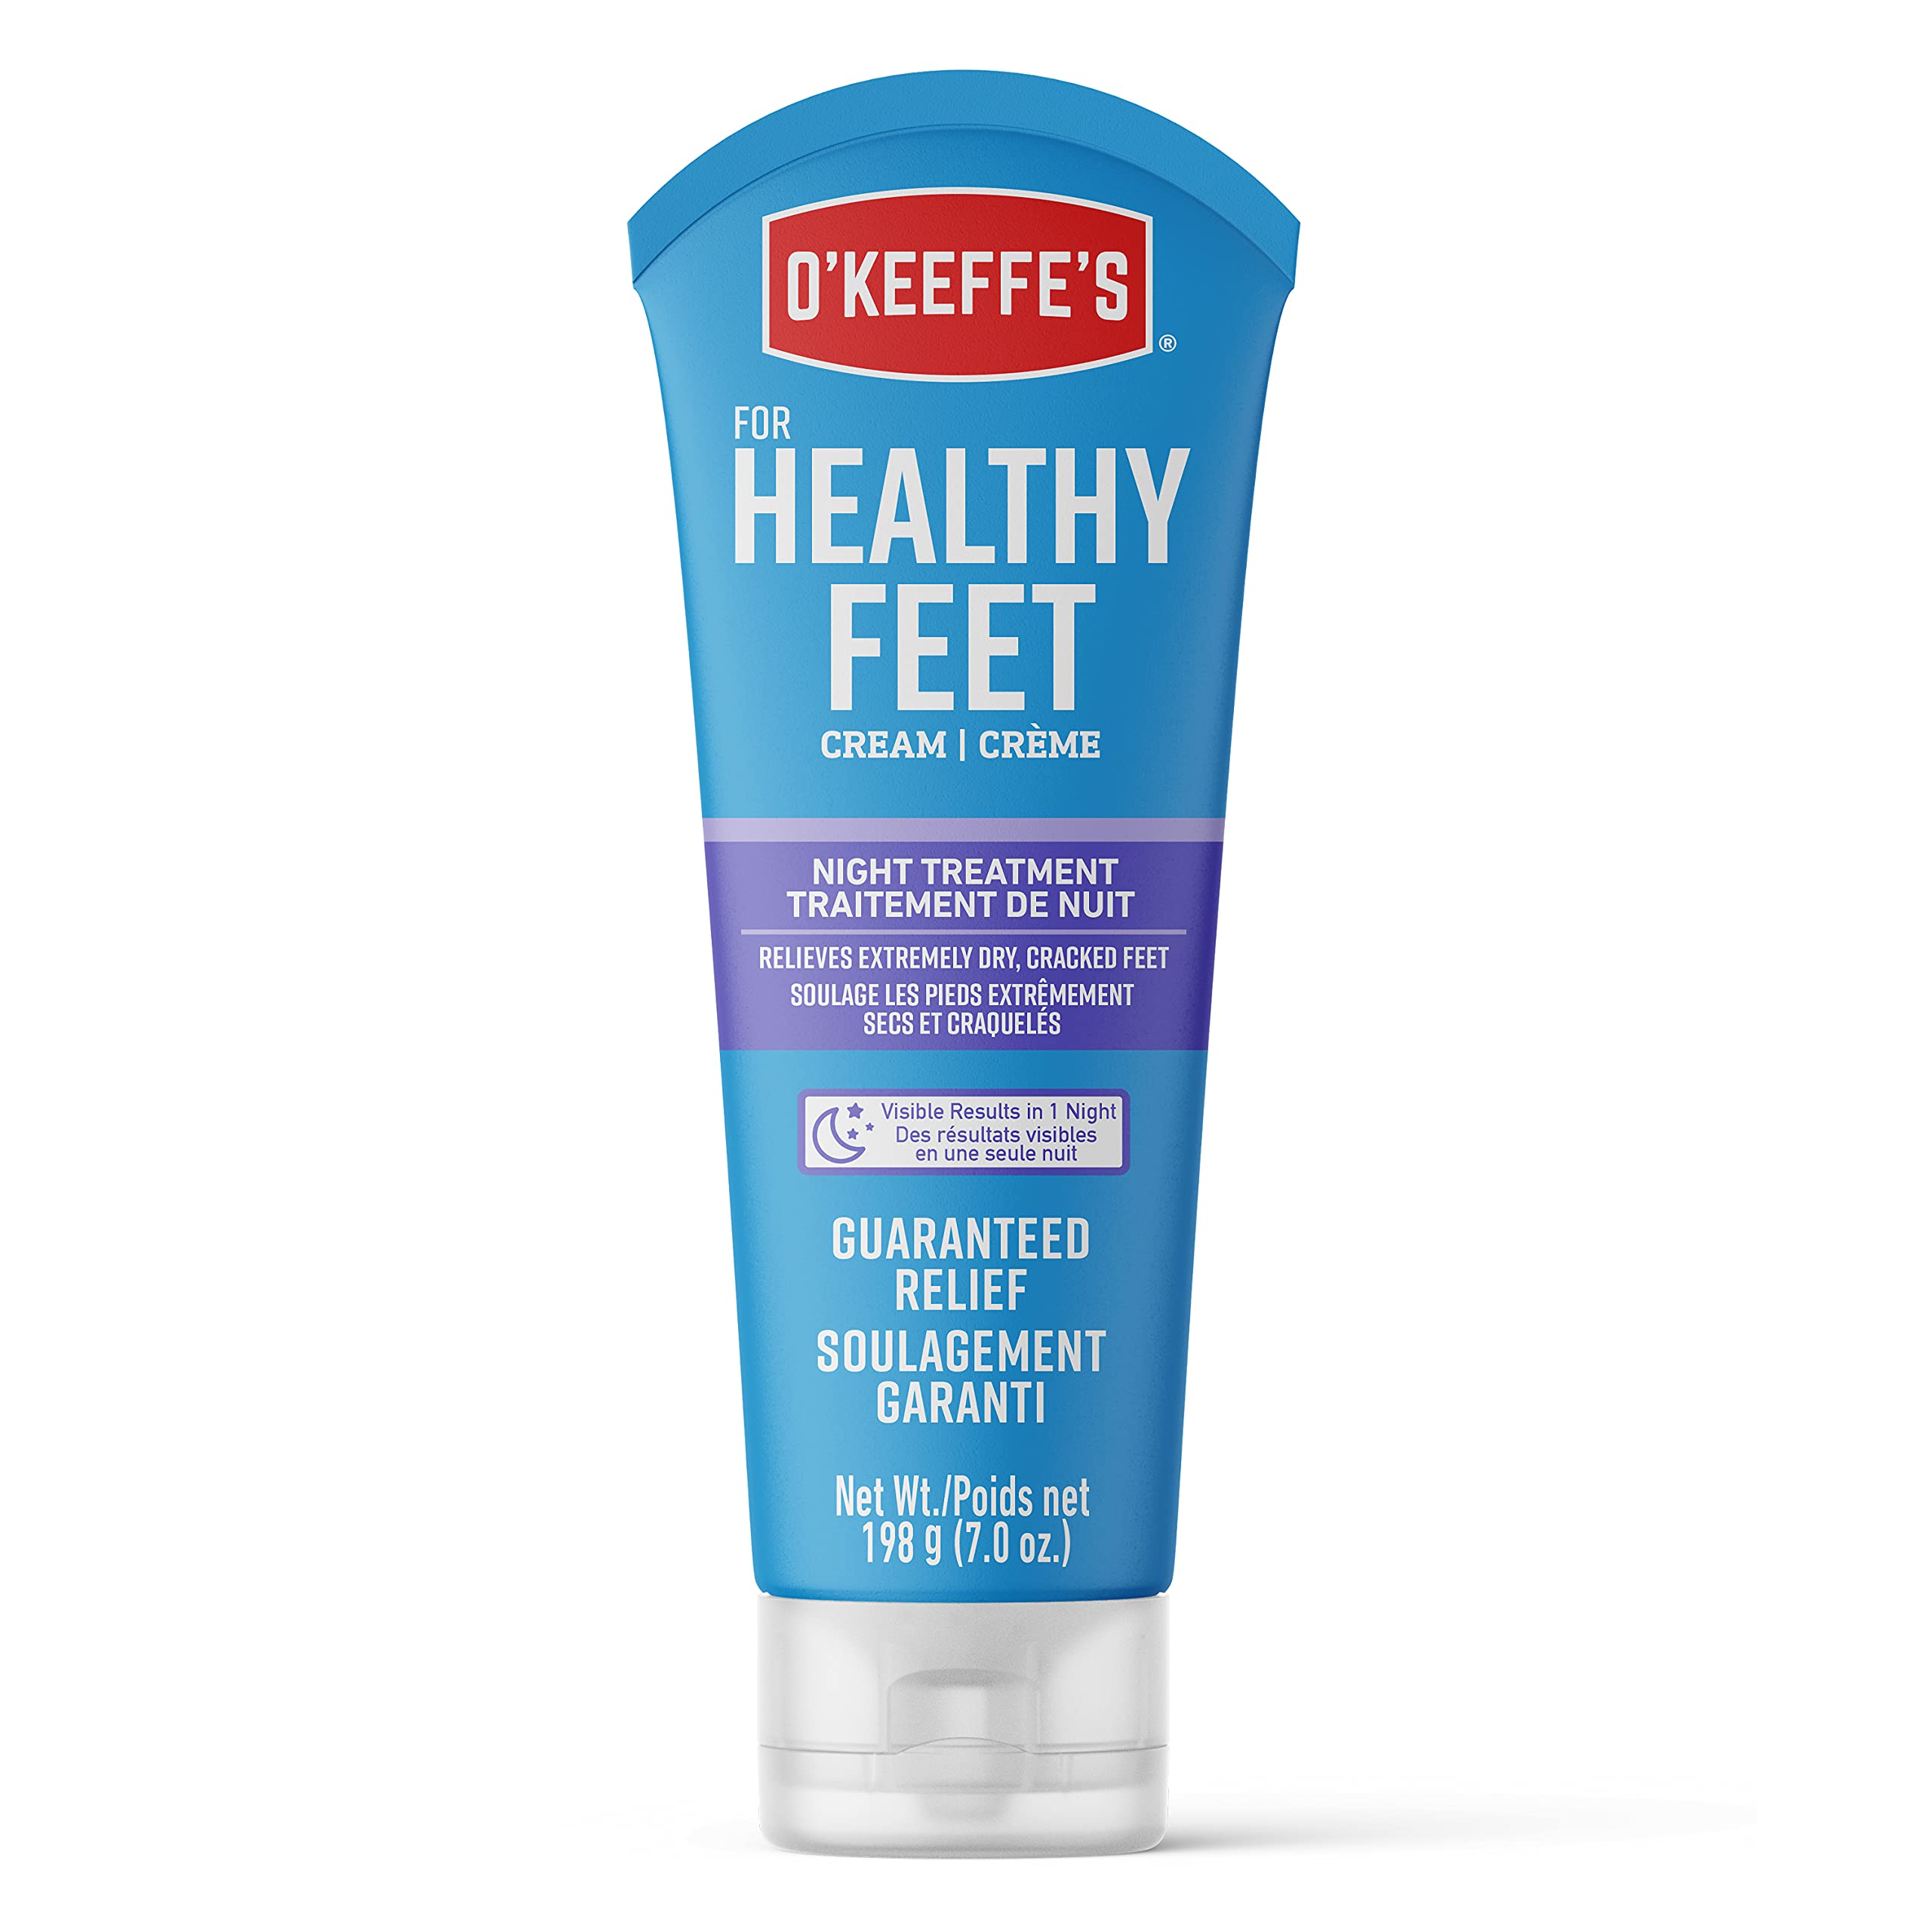 O'Keeffe's for Healthy Feet Night Treatment Foot Cream, Guaranteed Relief for Extremely Dry, Cracked Feet, Visible Results in 1 Night, 7.0 Ounce Tube, (Pack of 1)